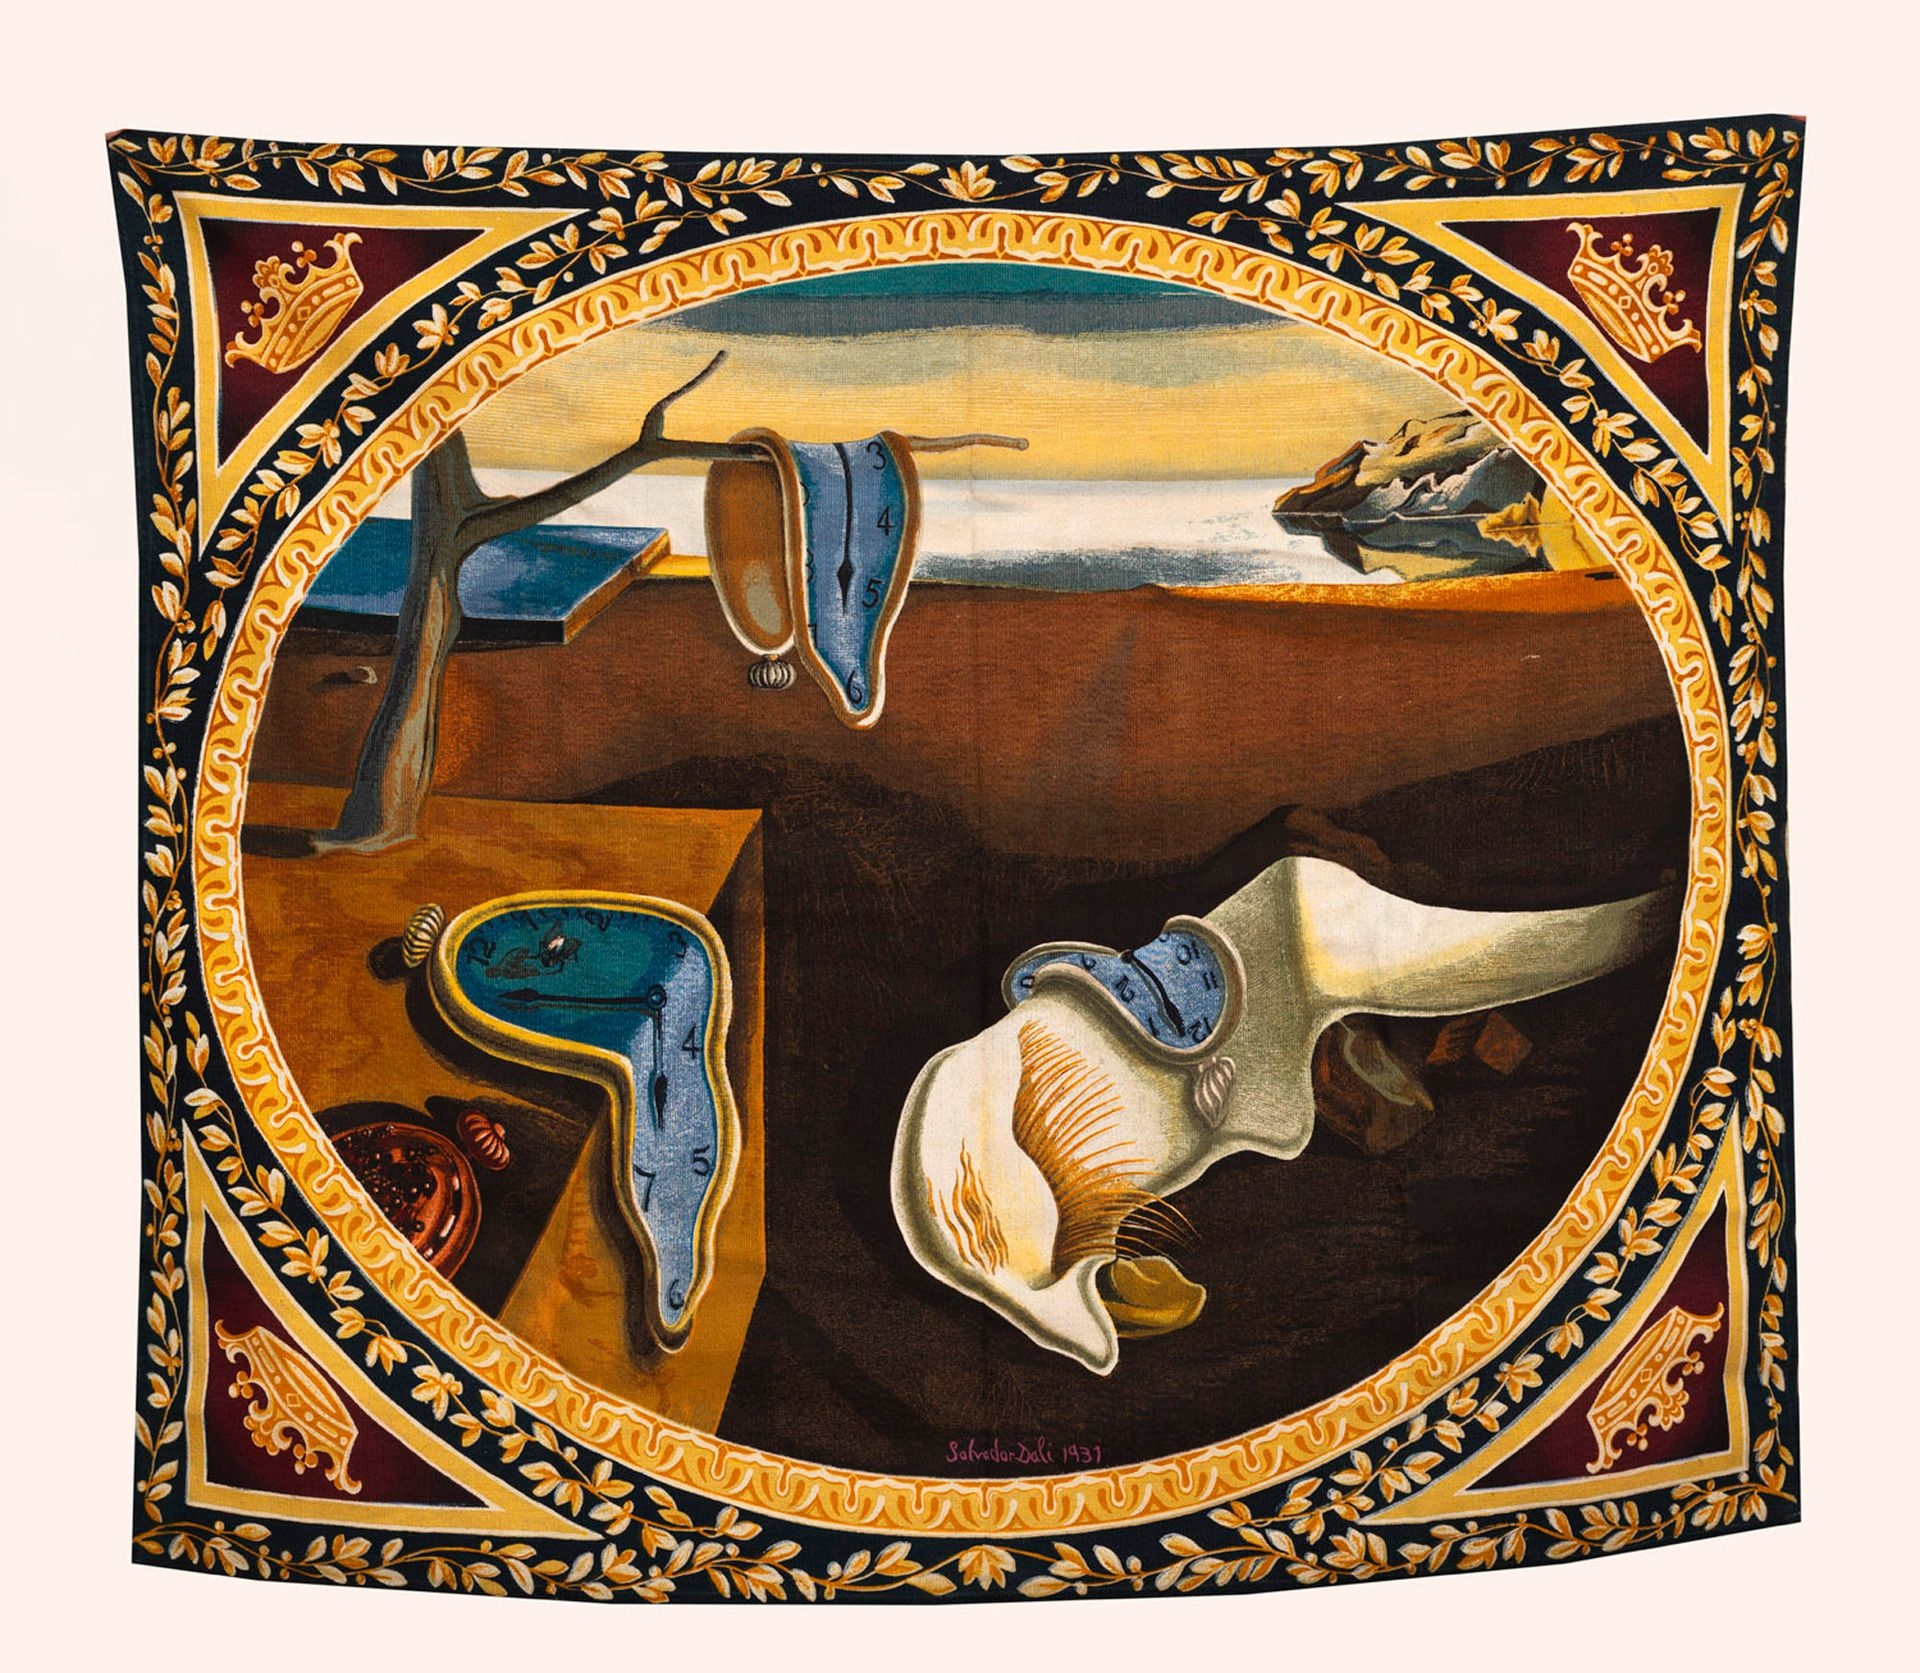 Artwork by Salvador Dalí, The Persistence of Memory, Made of Tapestry